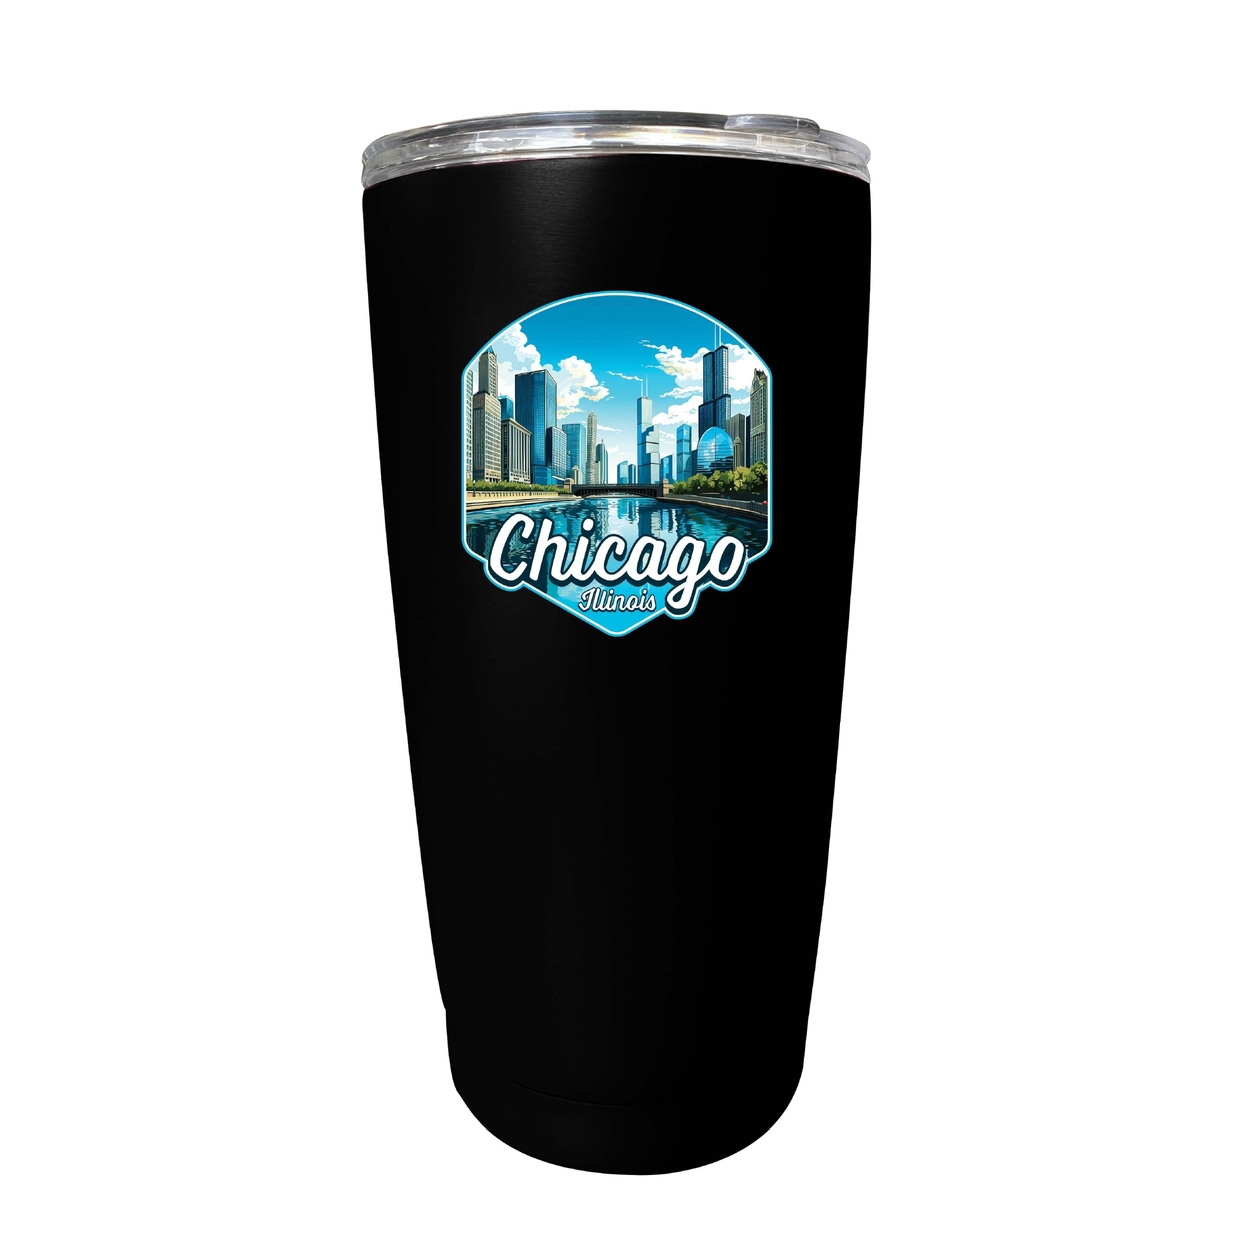 Chicago Illinois A Souvenir 16 Oz Insulated Tumbler - Stainless Steel,,2-Pack